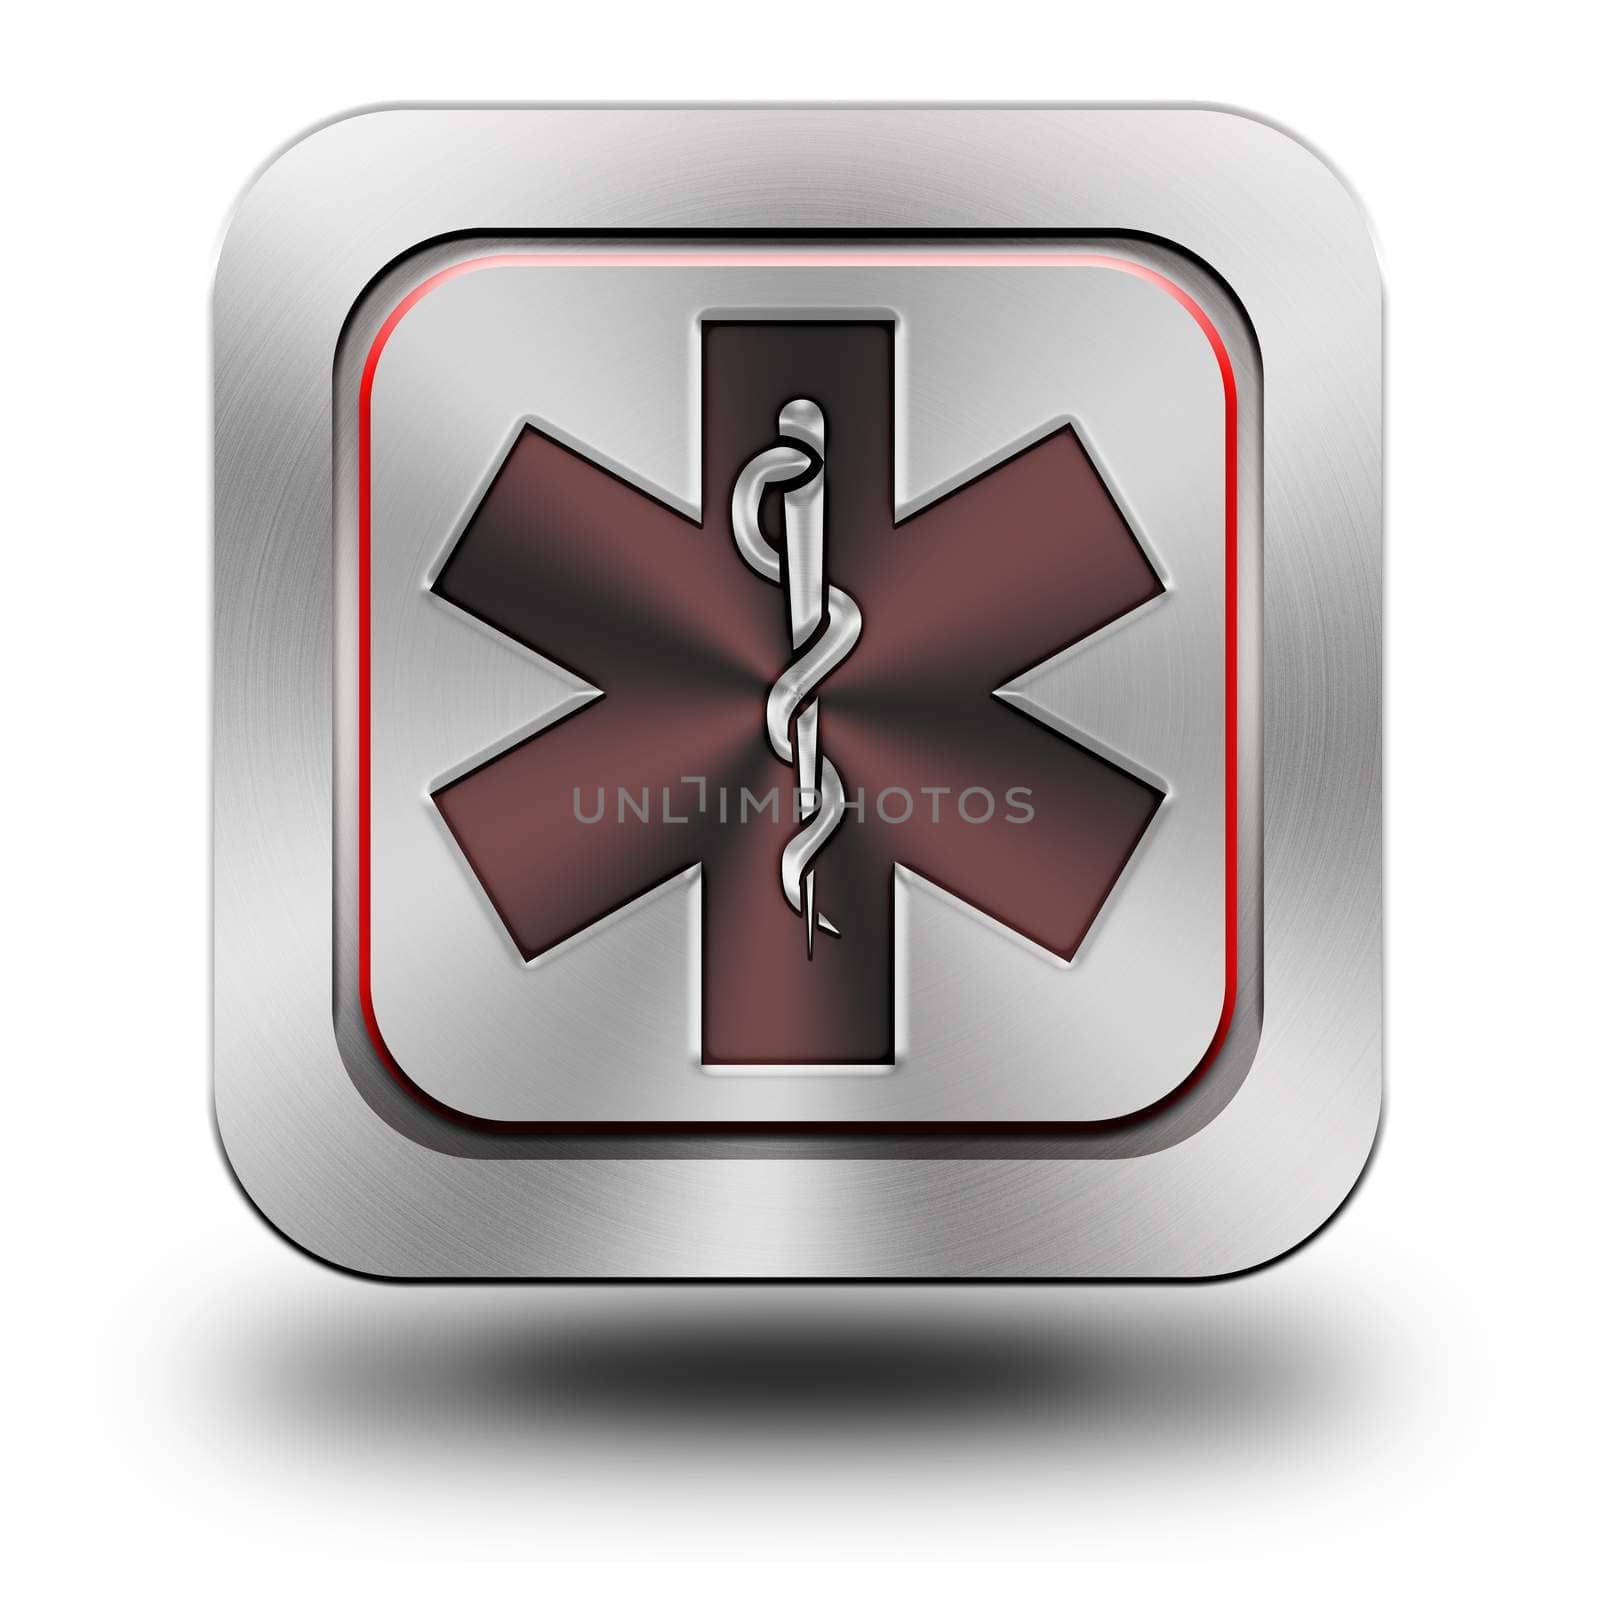 Pharmacy, aluminum, steel, chromium, glossy, icon, button, sign, icons, buttons, crazy colors